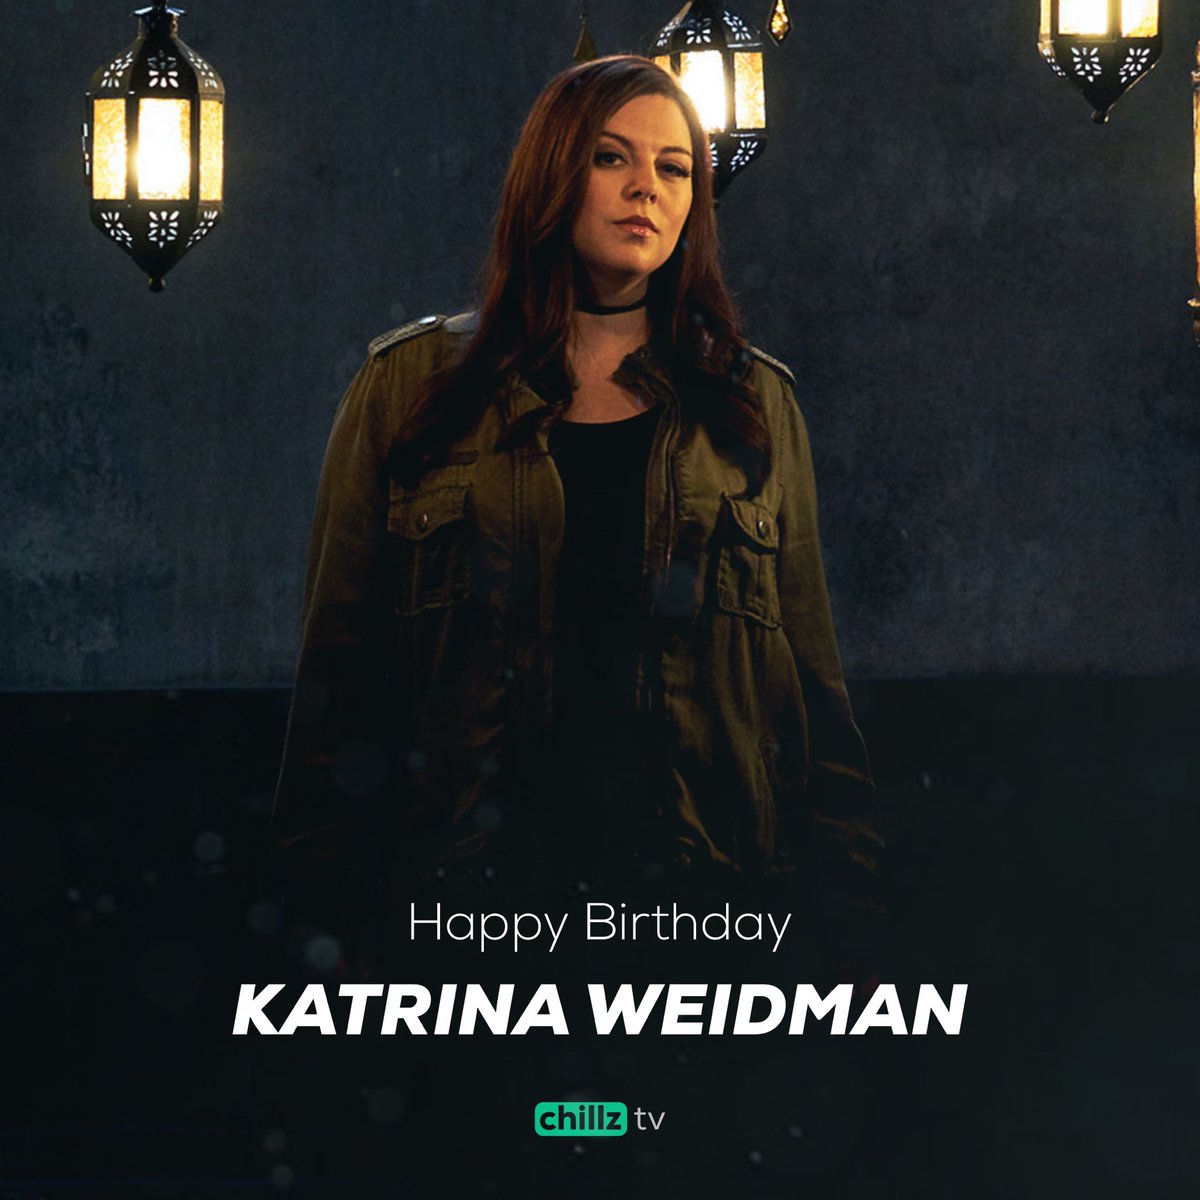 Happy Birthday to #paranormal investigator and co-star in TVs #PortalsToHell & formerly in #ParanormalLockdown, @KatrinaWeidman! 🥳🎉🎁